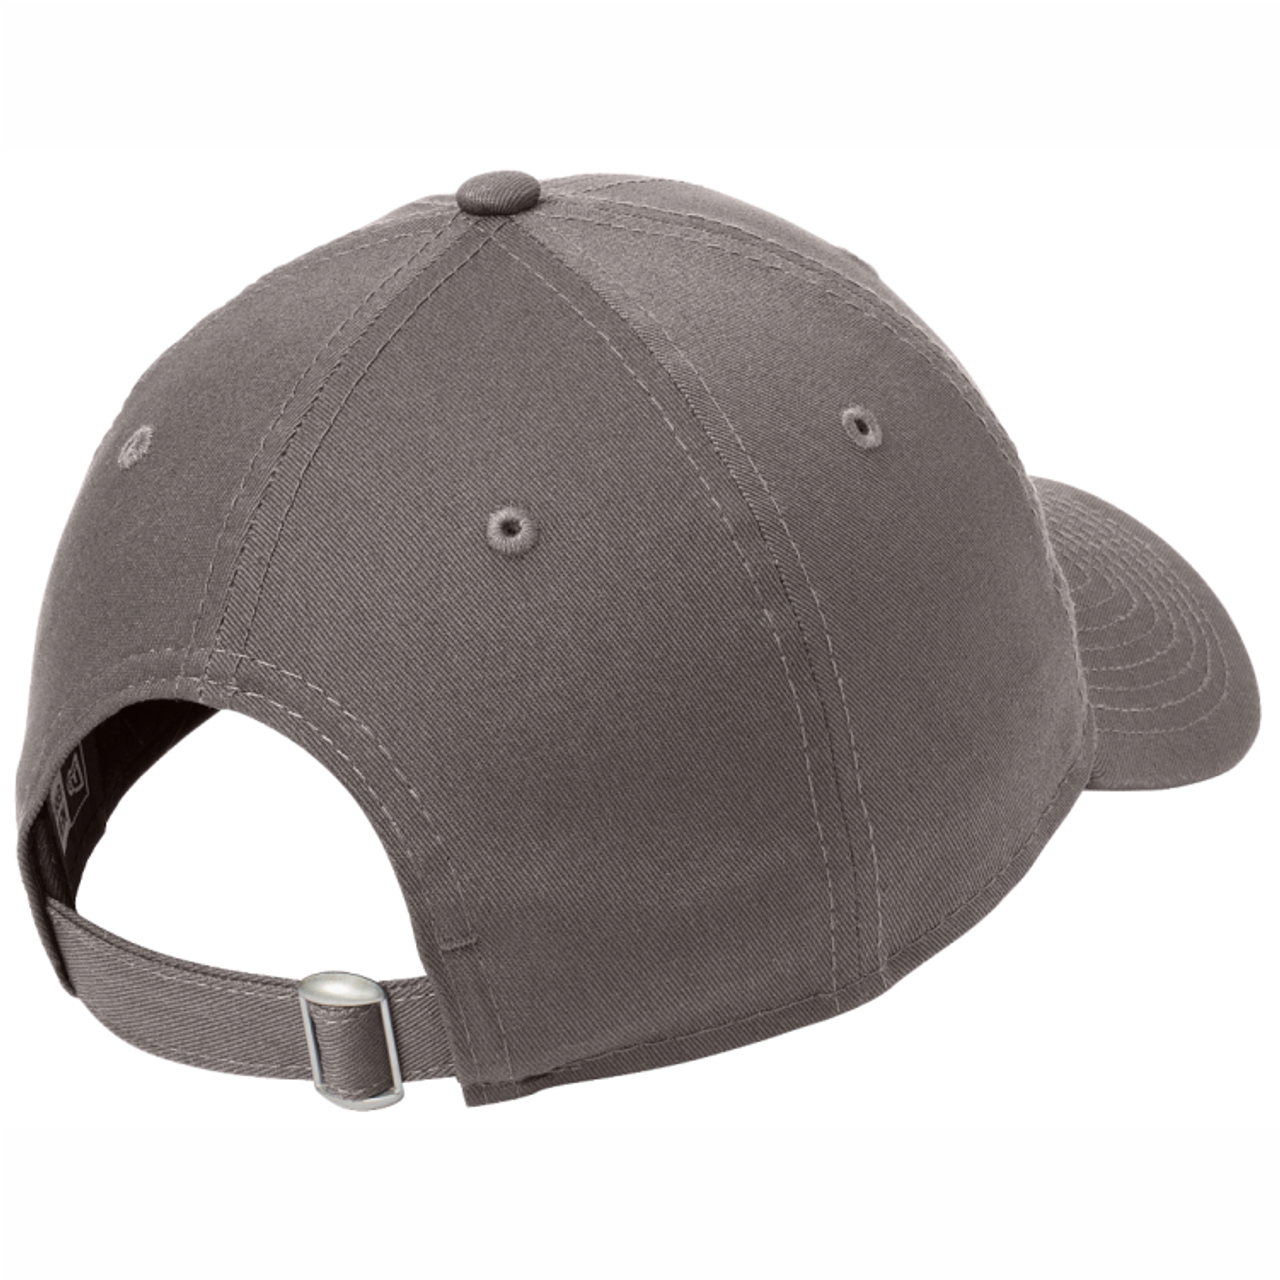 Loudoun Rugby Adjustable Twill Hat